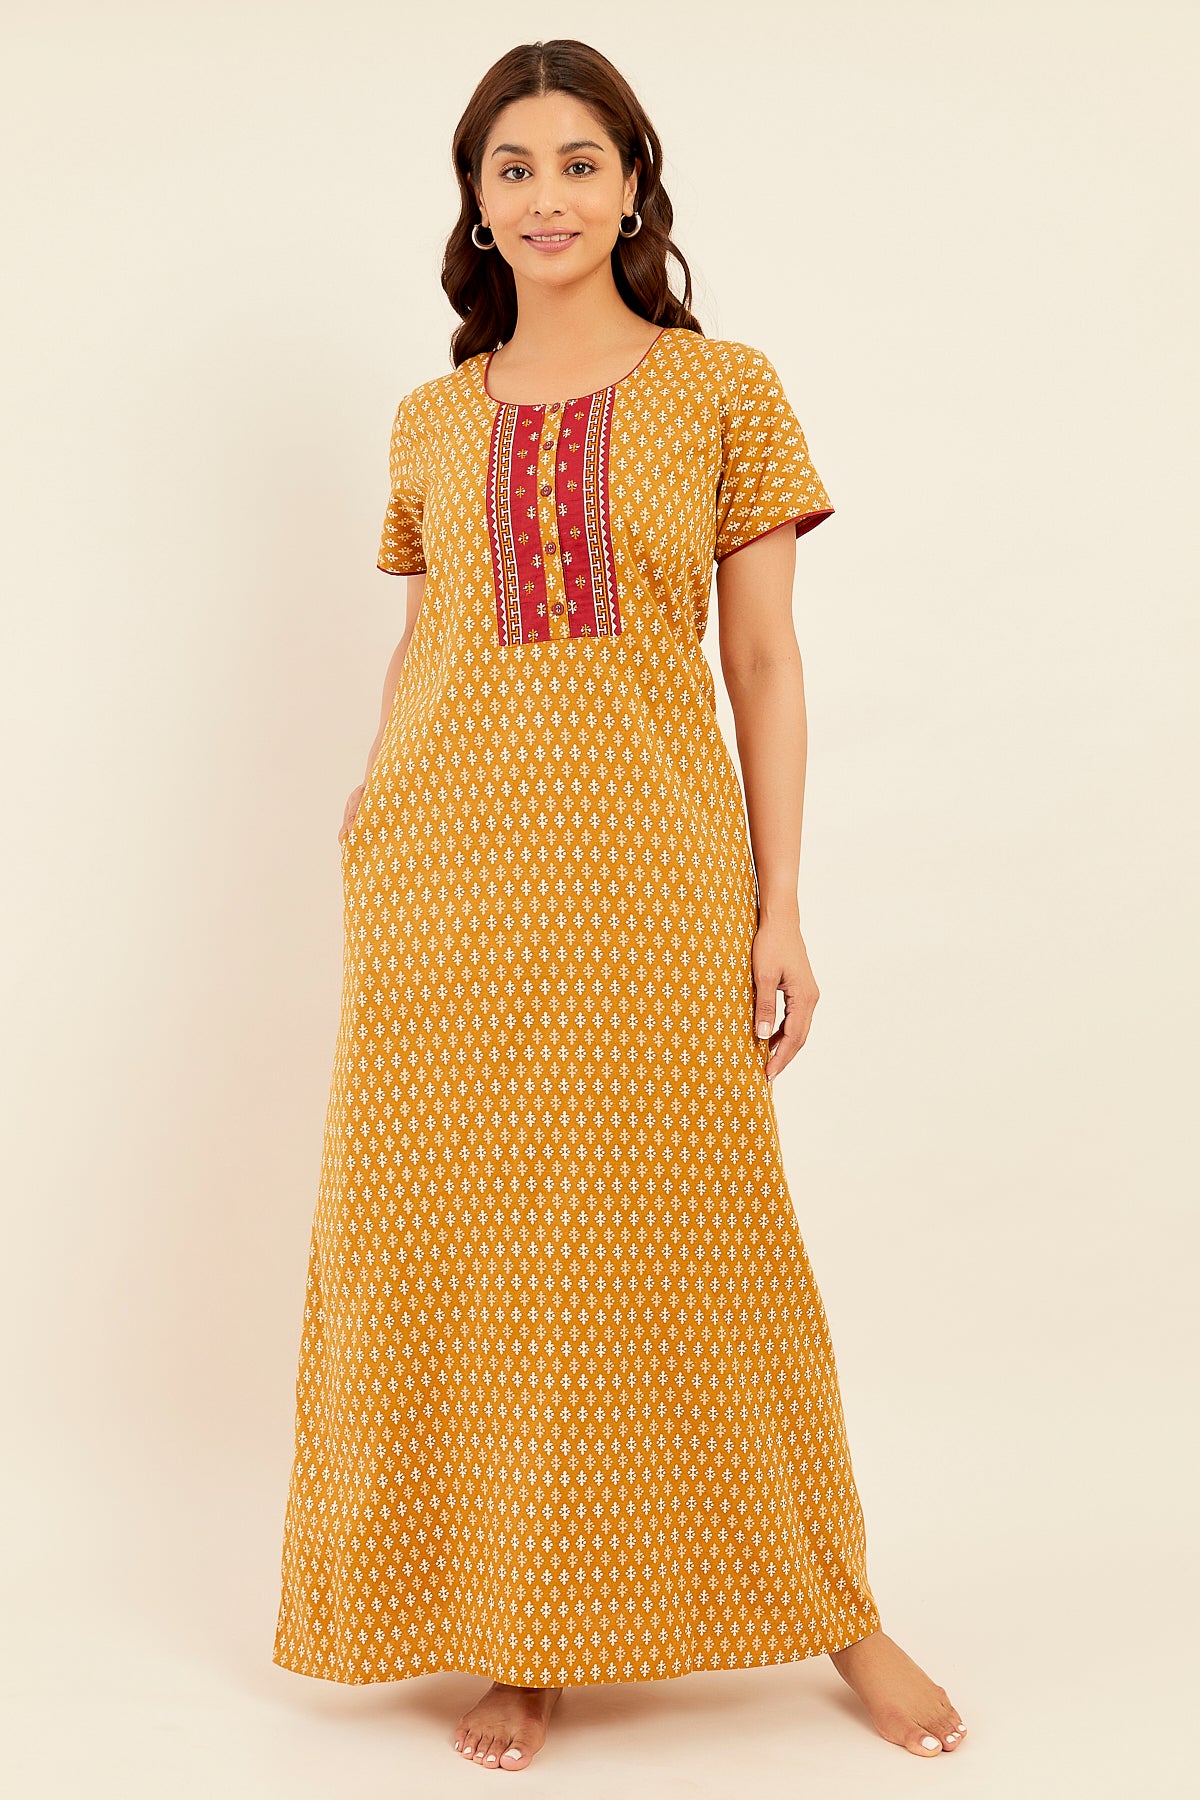 All Over Geometric Printed With Contrast Embroidered Yoke Nighty - Mustard